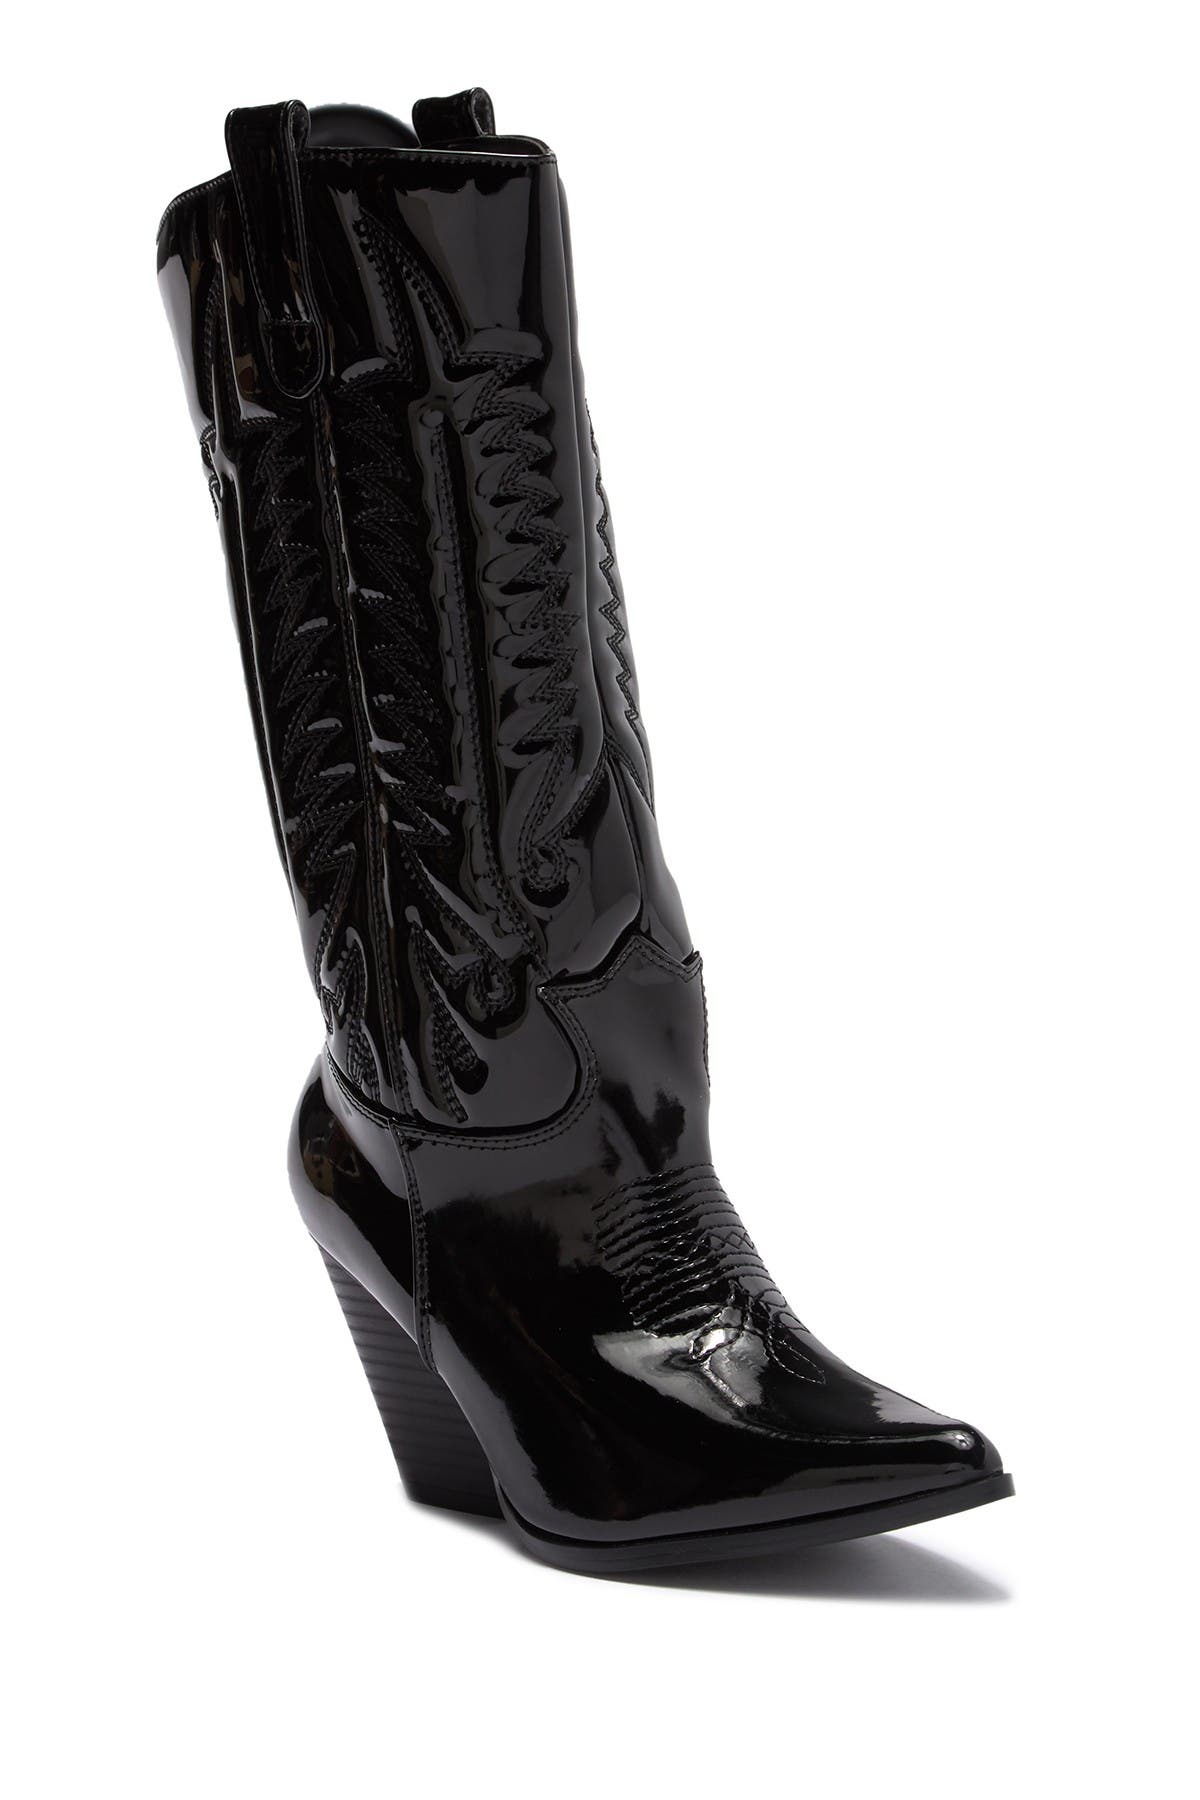 Cape Robbin | Southern Bell Patent Boot 